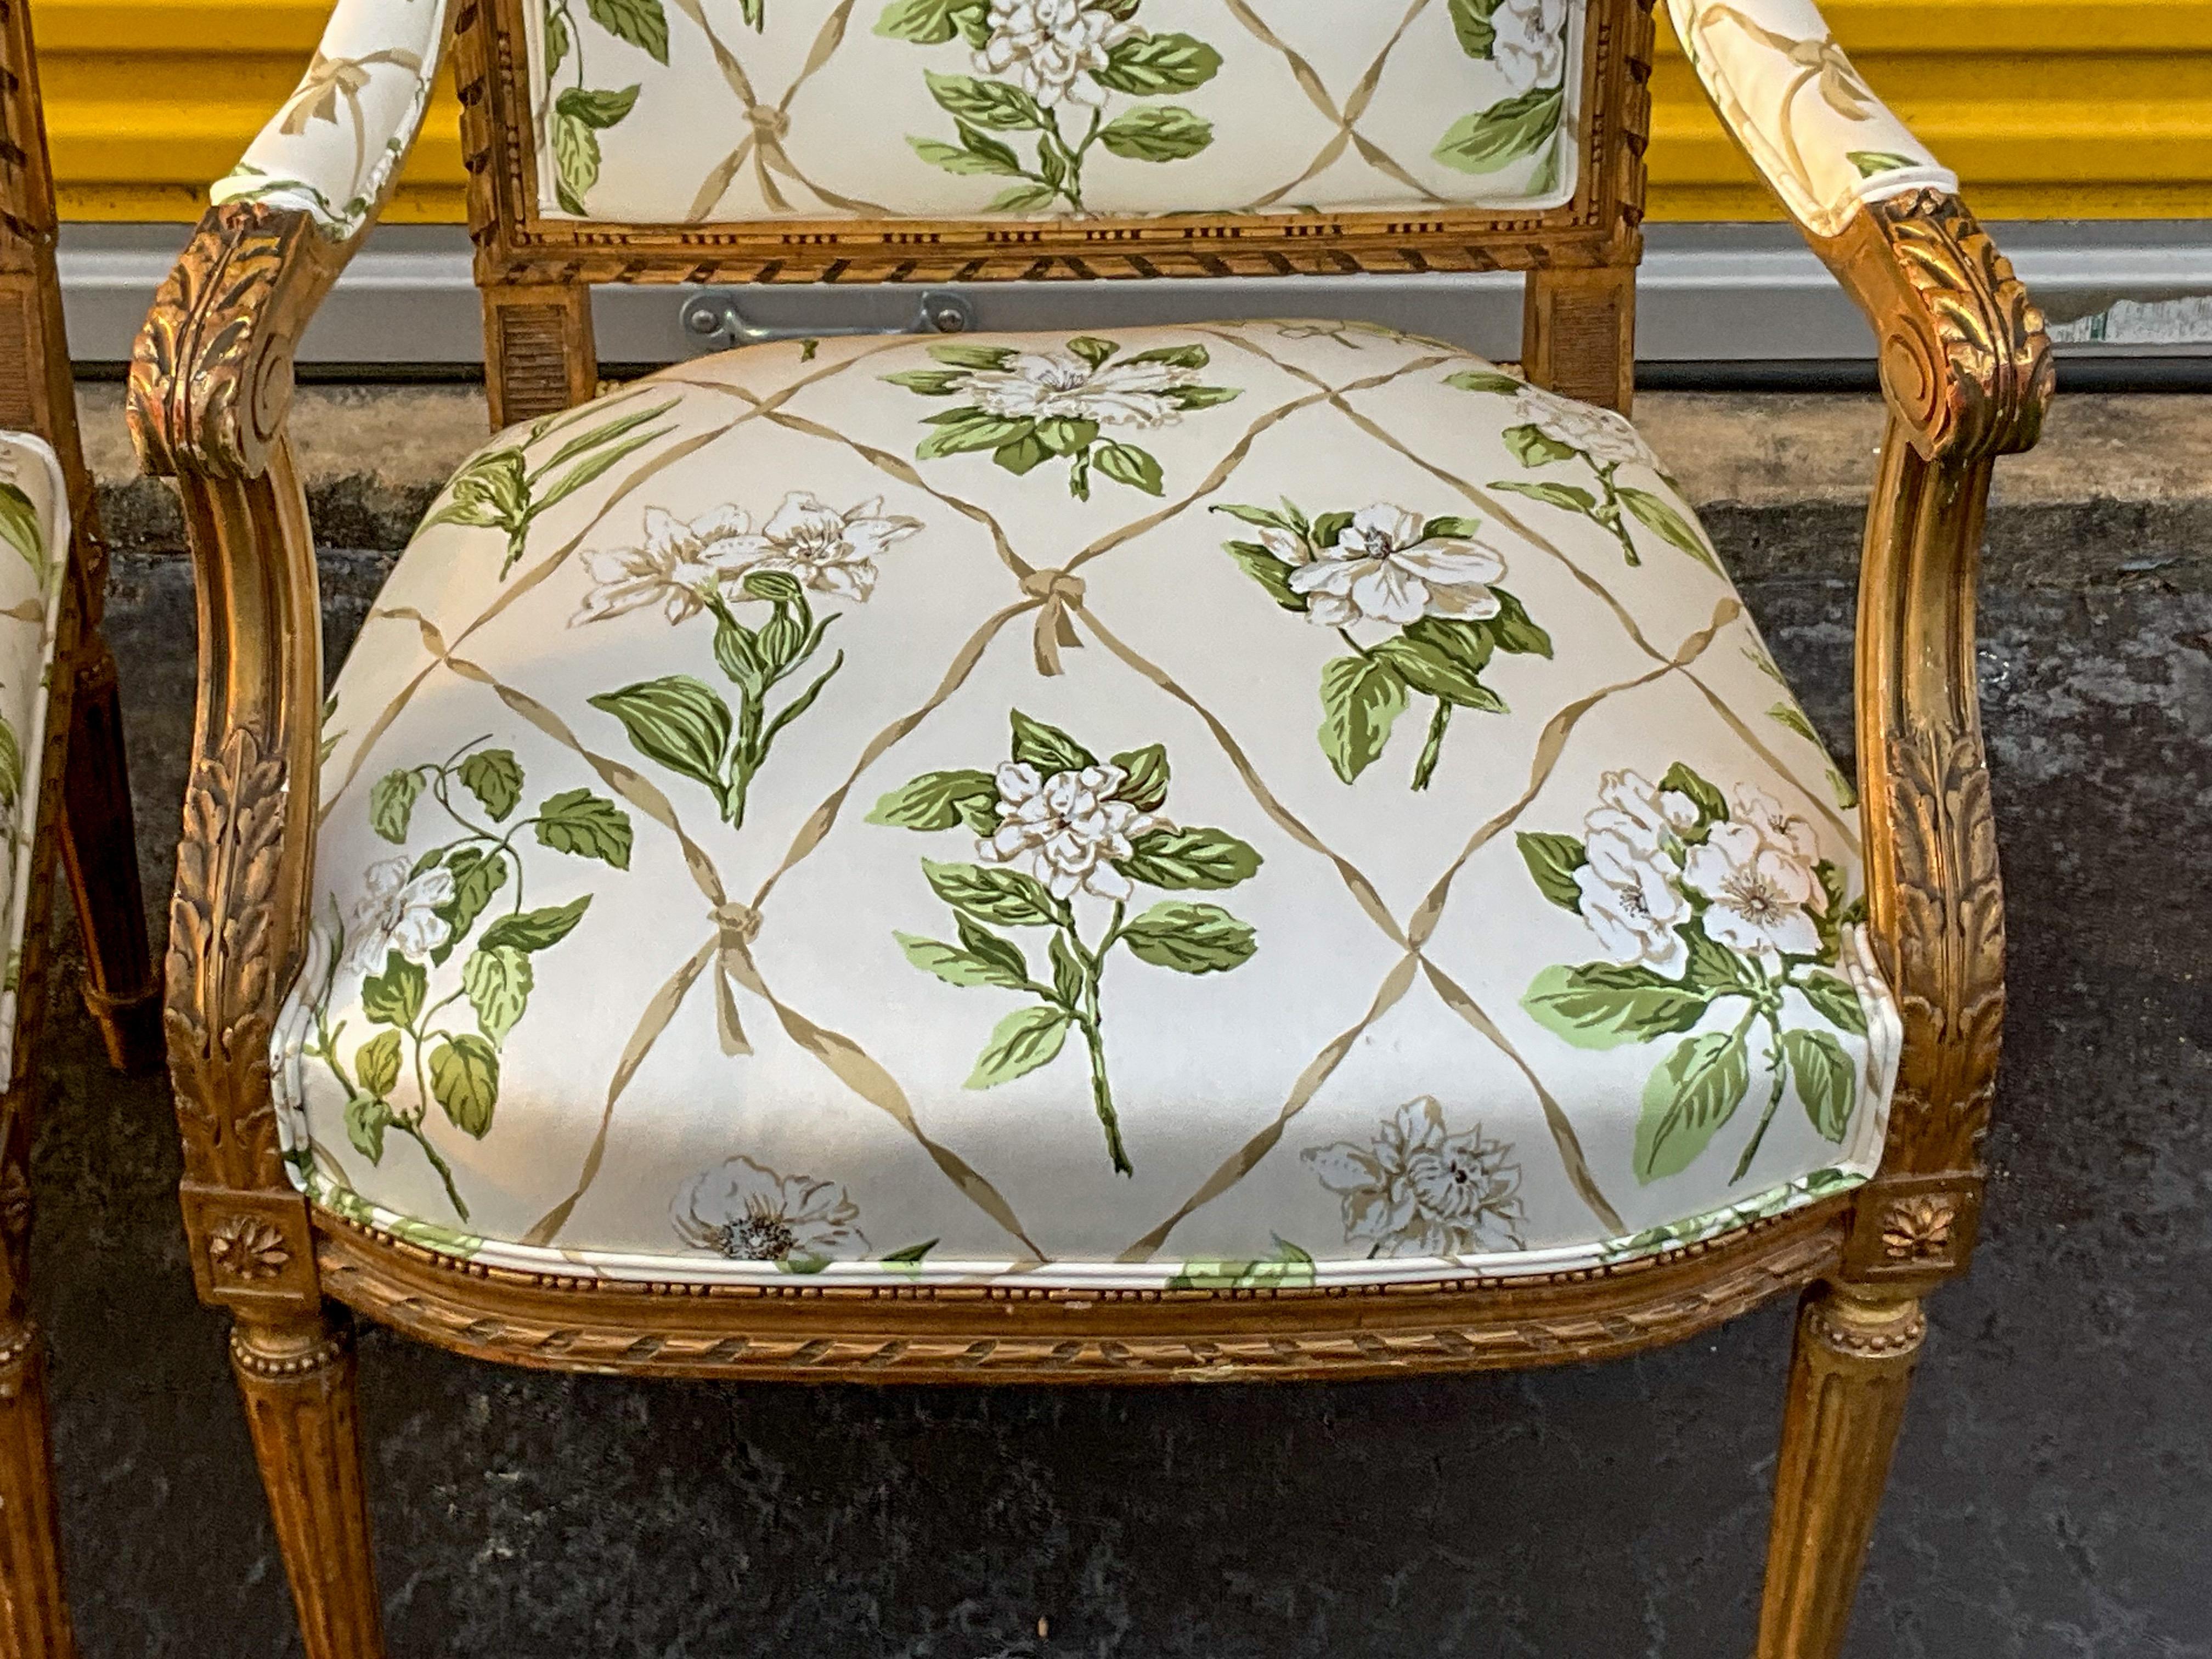 20th Century 19th-C. Pair of French Louis XVI Style Carved Giltwood Bergere Chairs